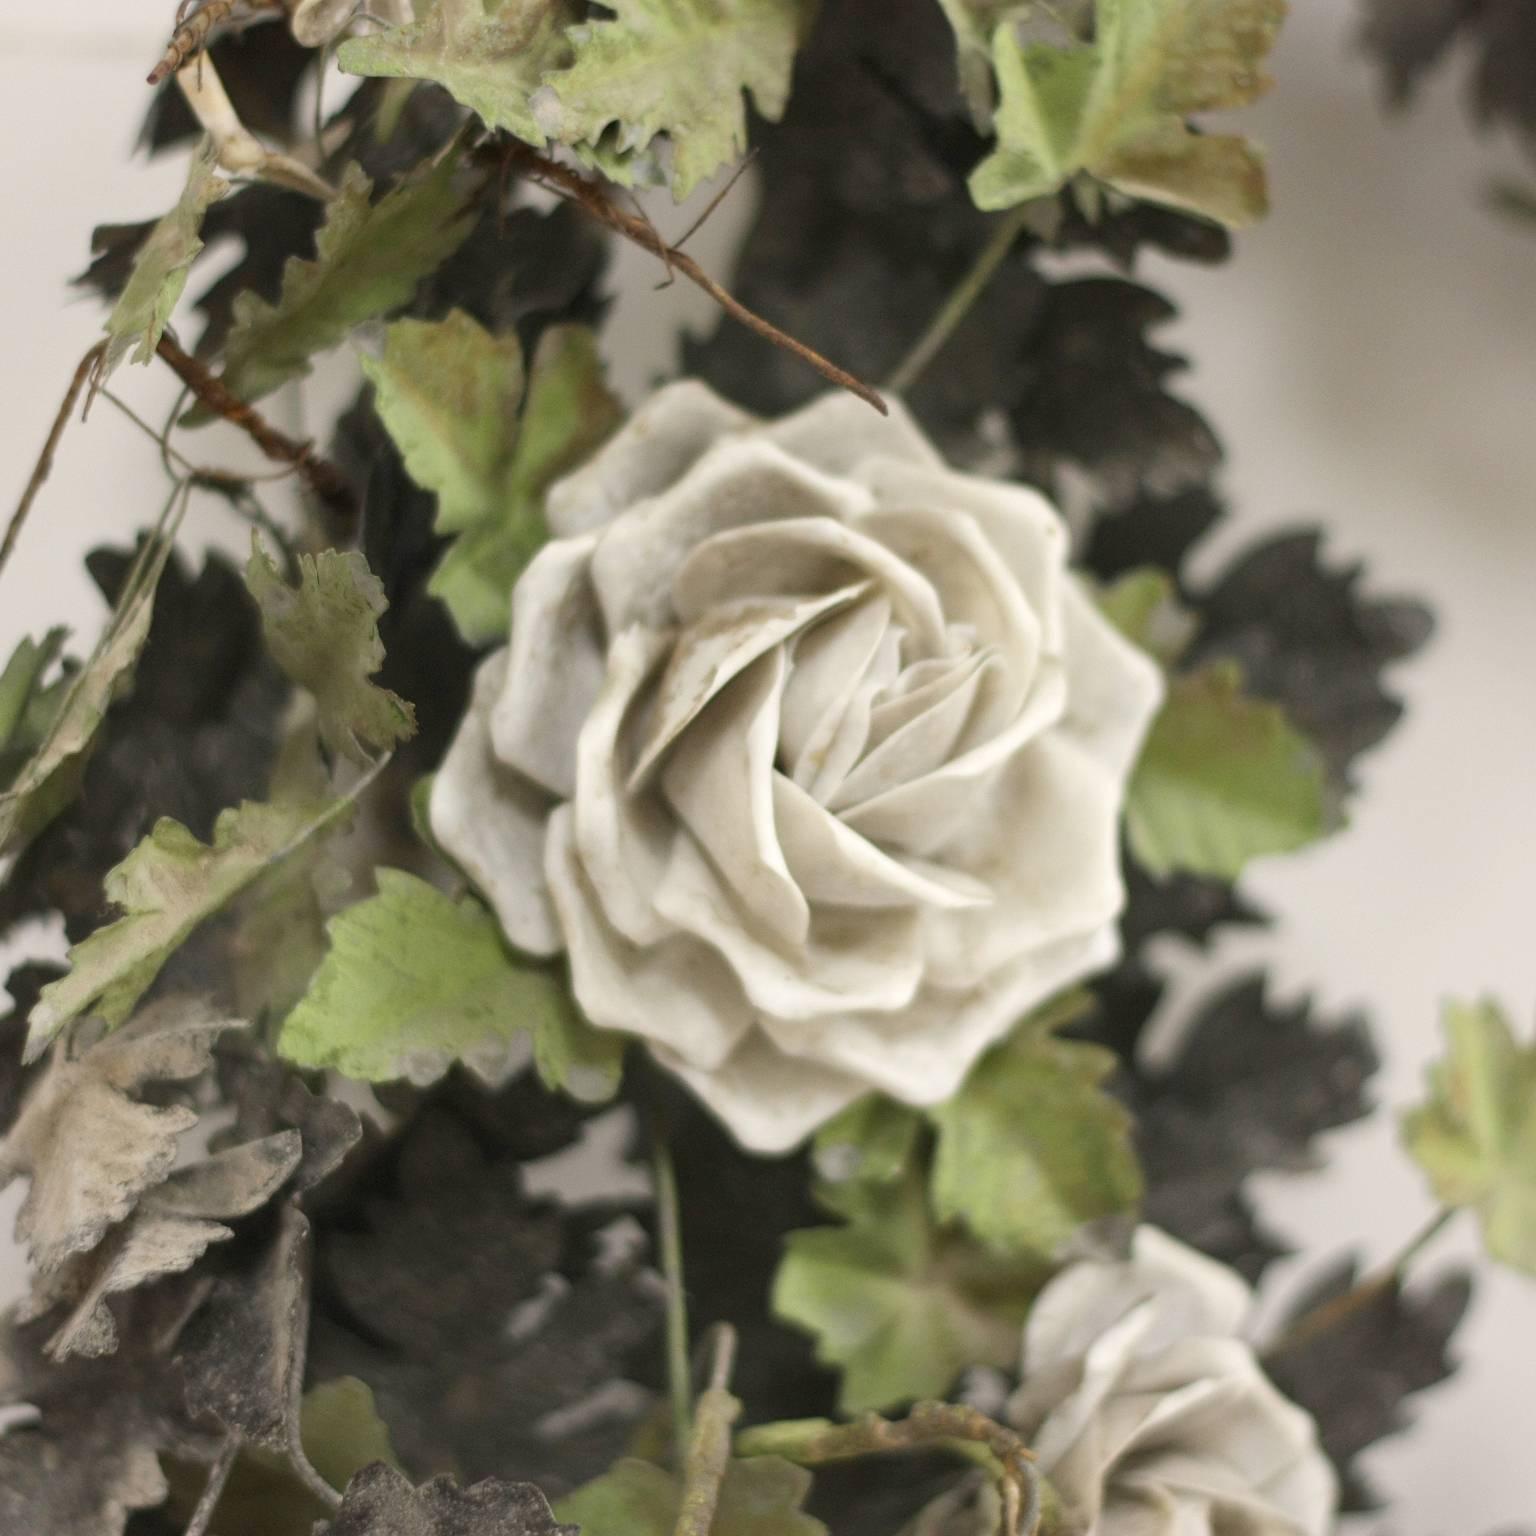 Painted tole wreath with handcrafted Roses. Perfect for hanging or as a centerpiece.